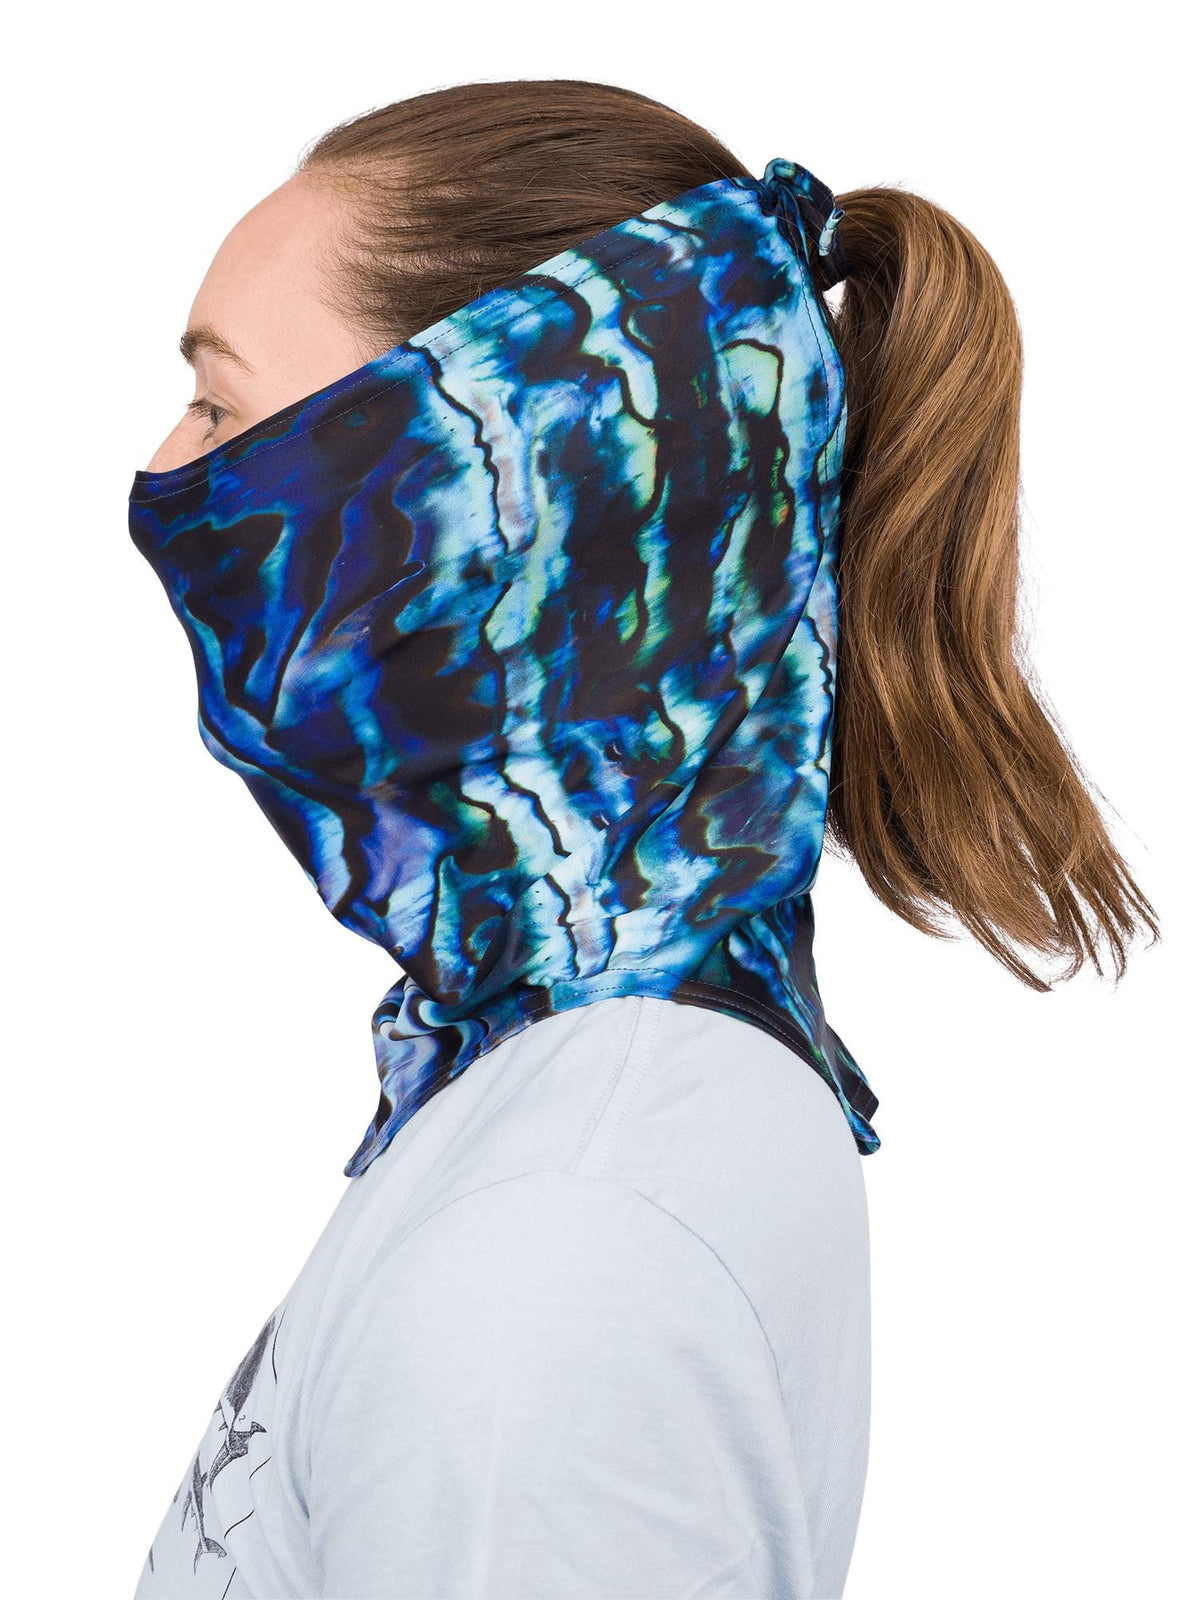 Model: Back tie to adjust size around face, or attach to a hat or ponytail. 